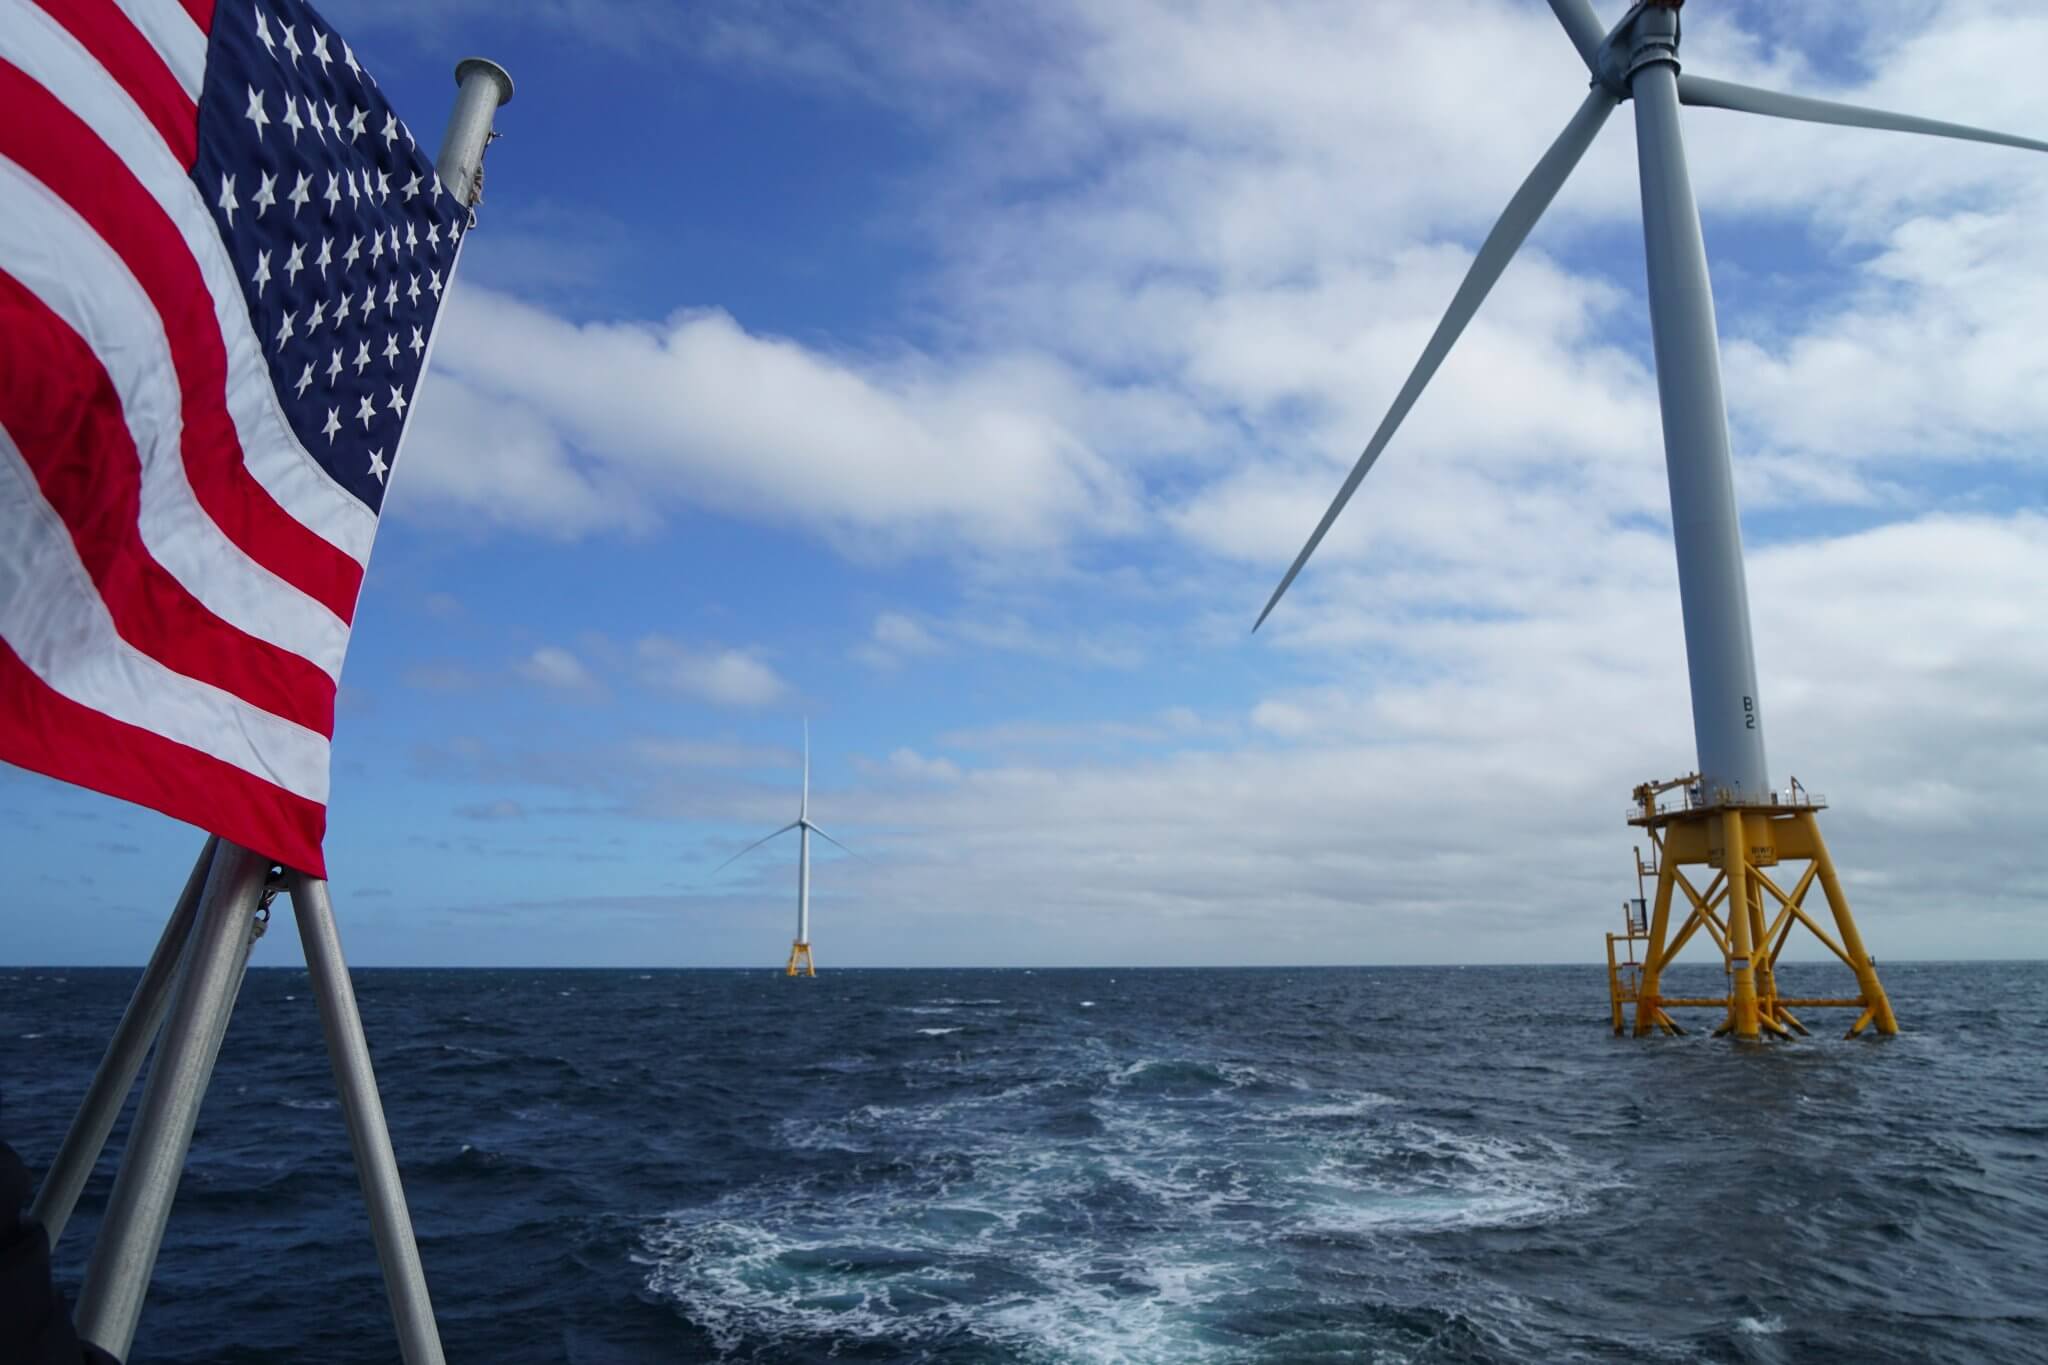 The future of offshore wind